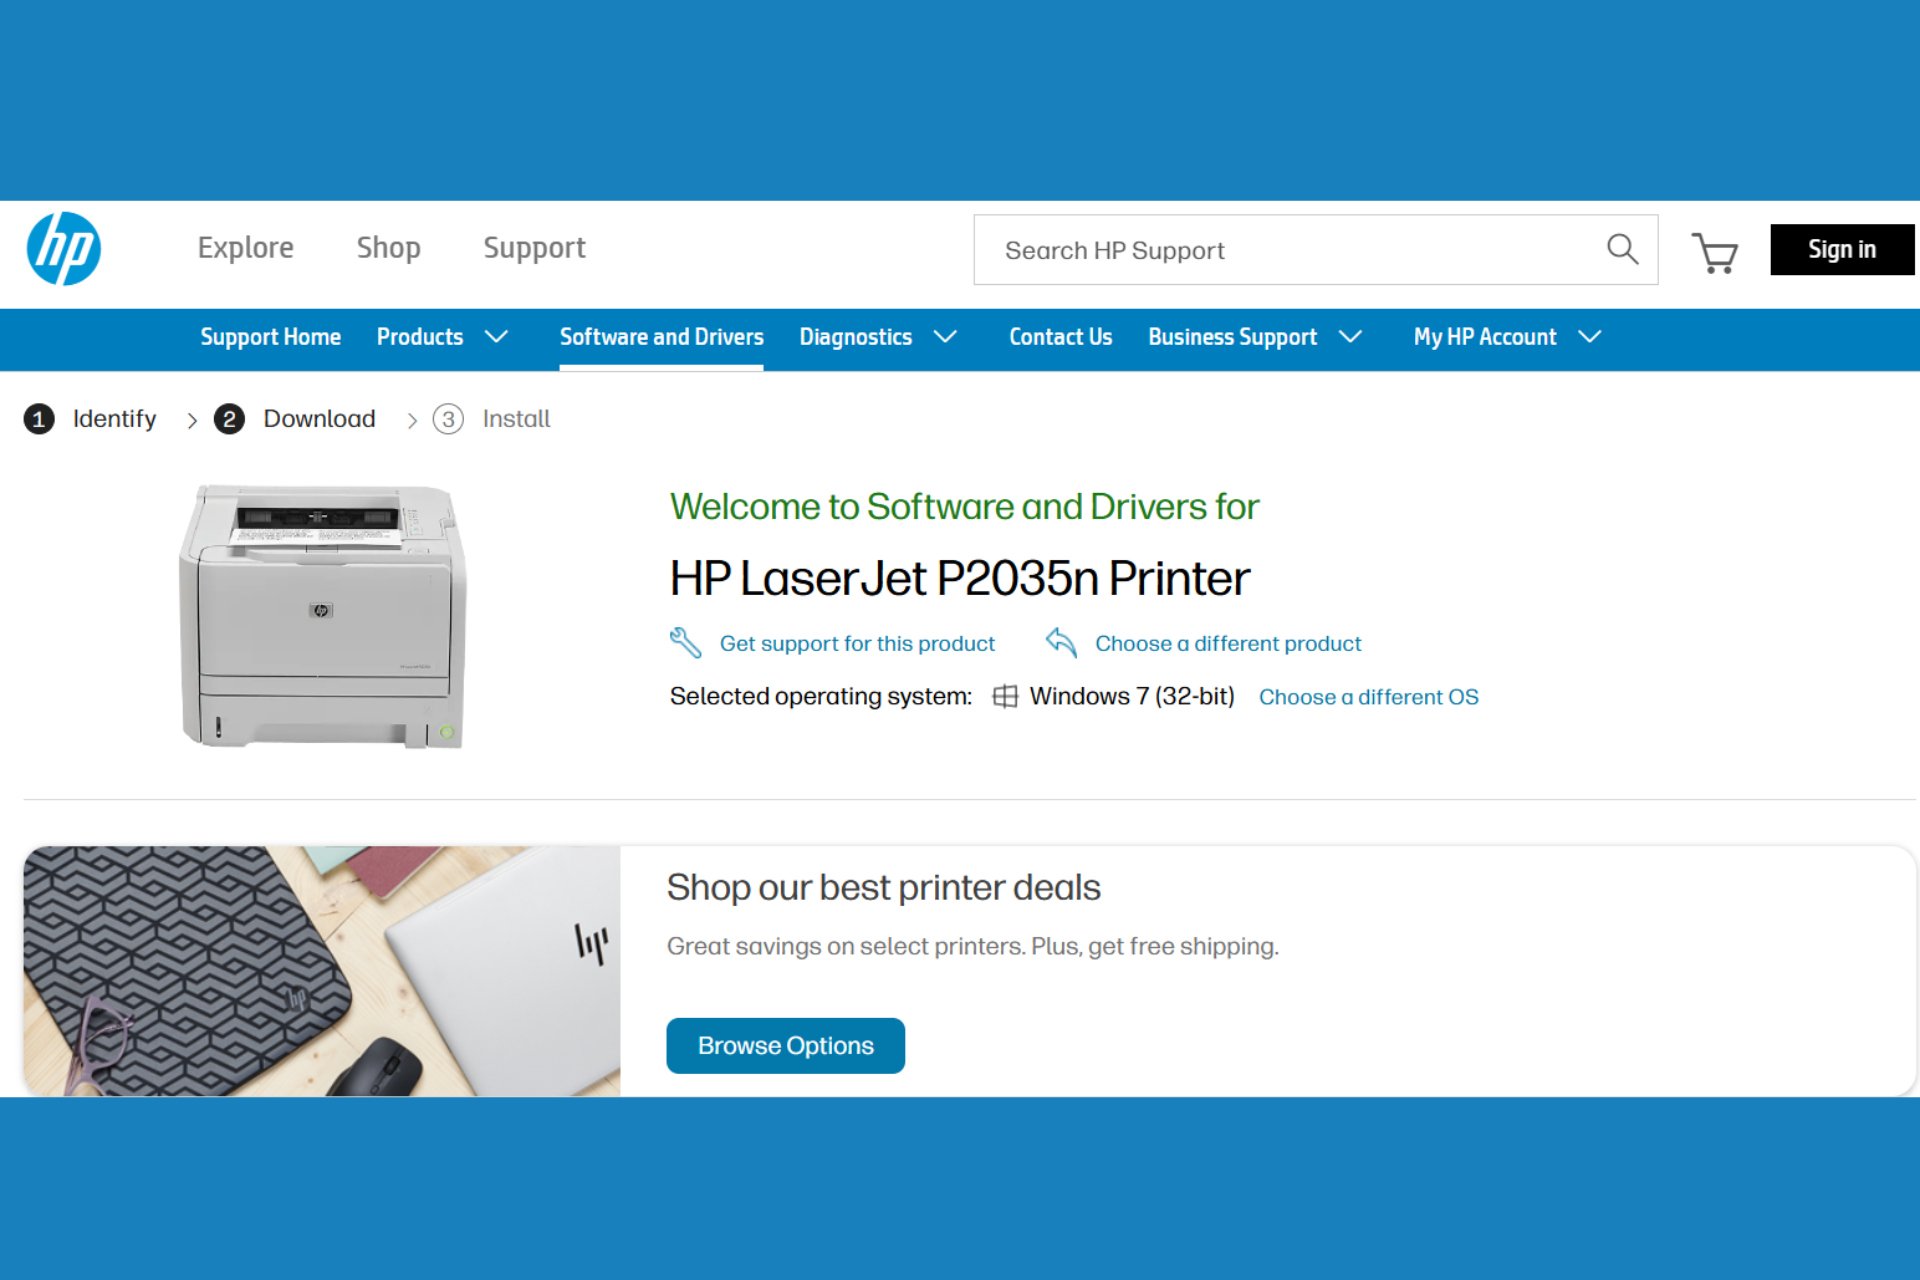 Download and install the HP LaserJet P2035n Driver for Windows 7